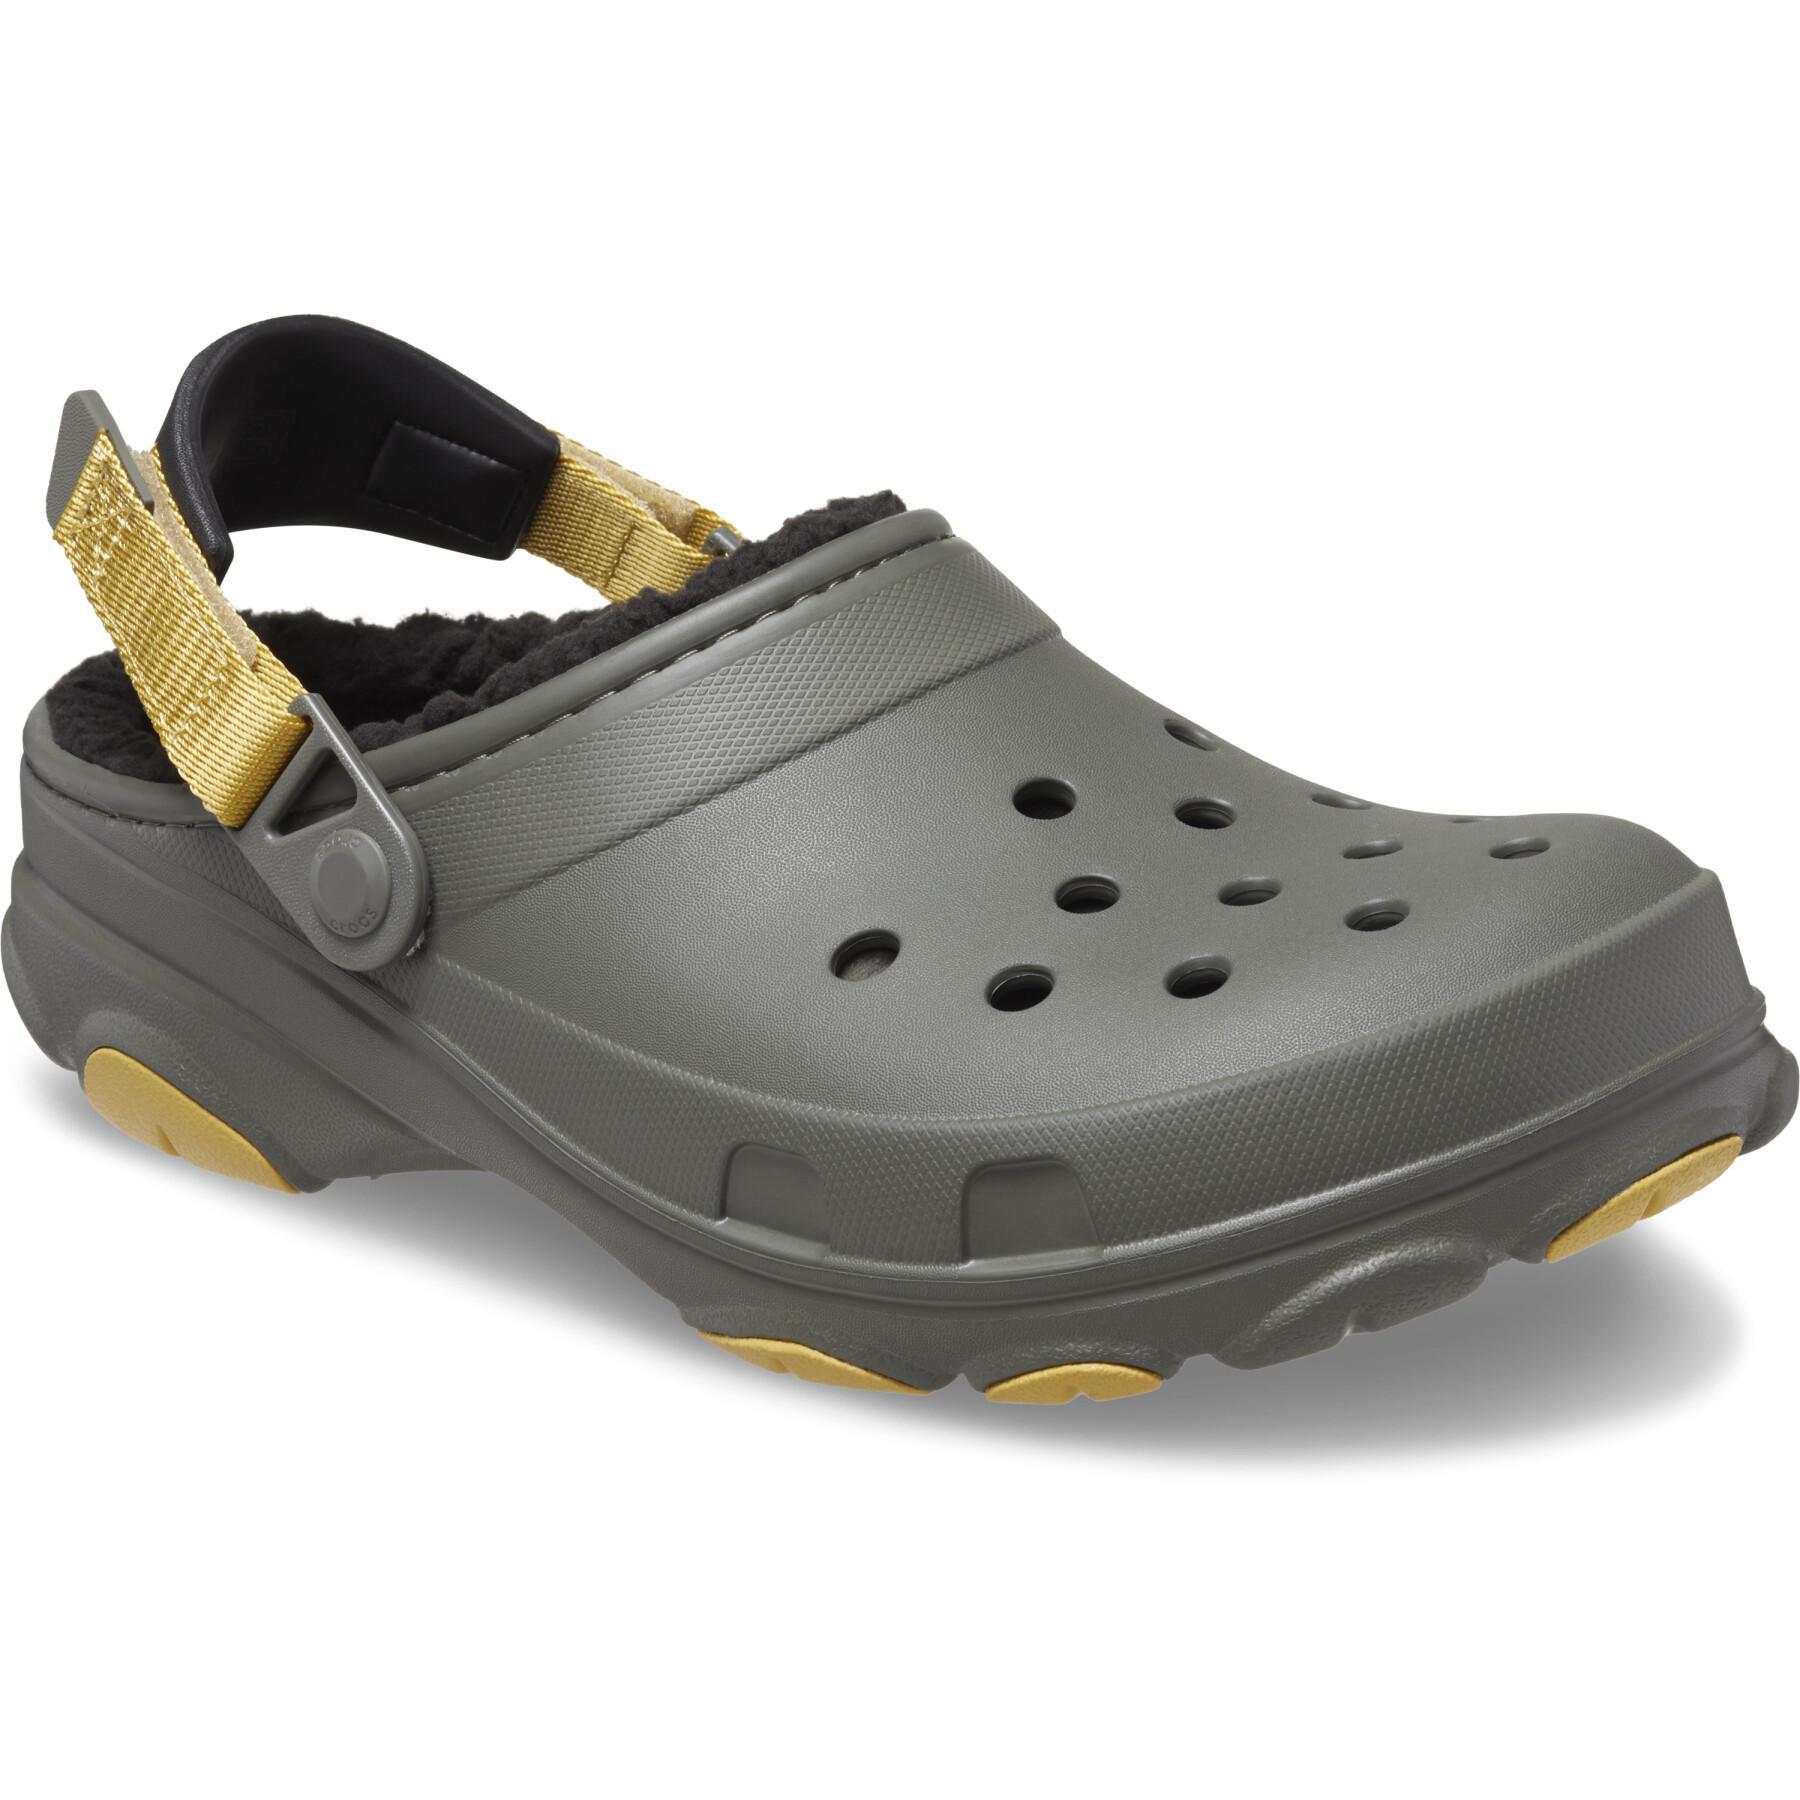 Clogs with lining Crocs All Terrain